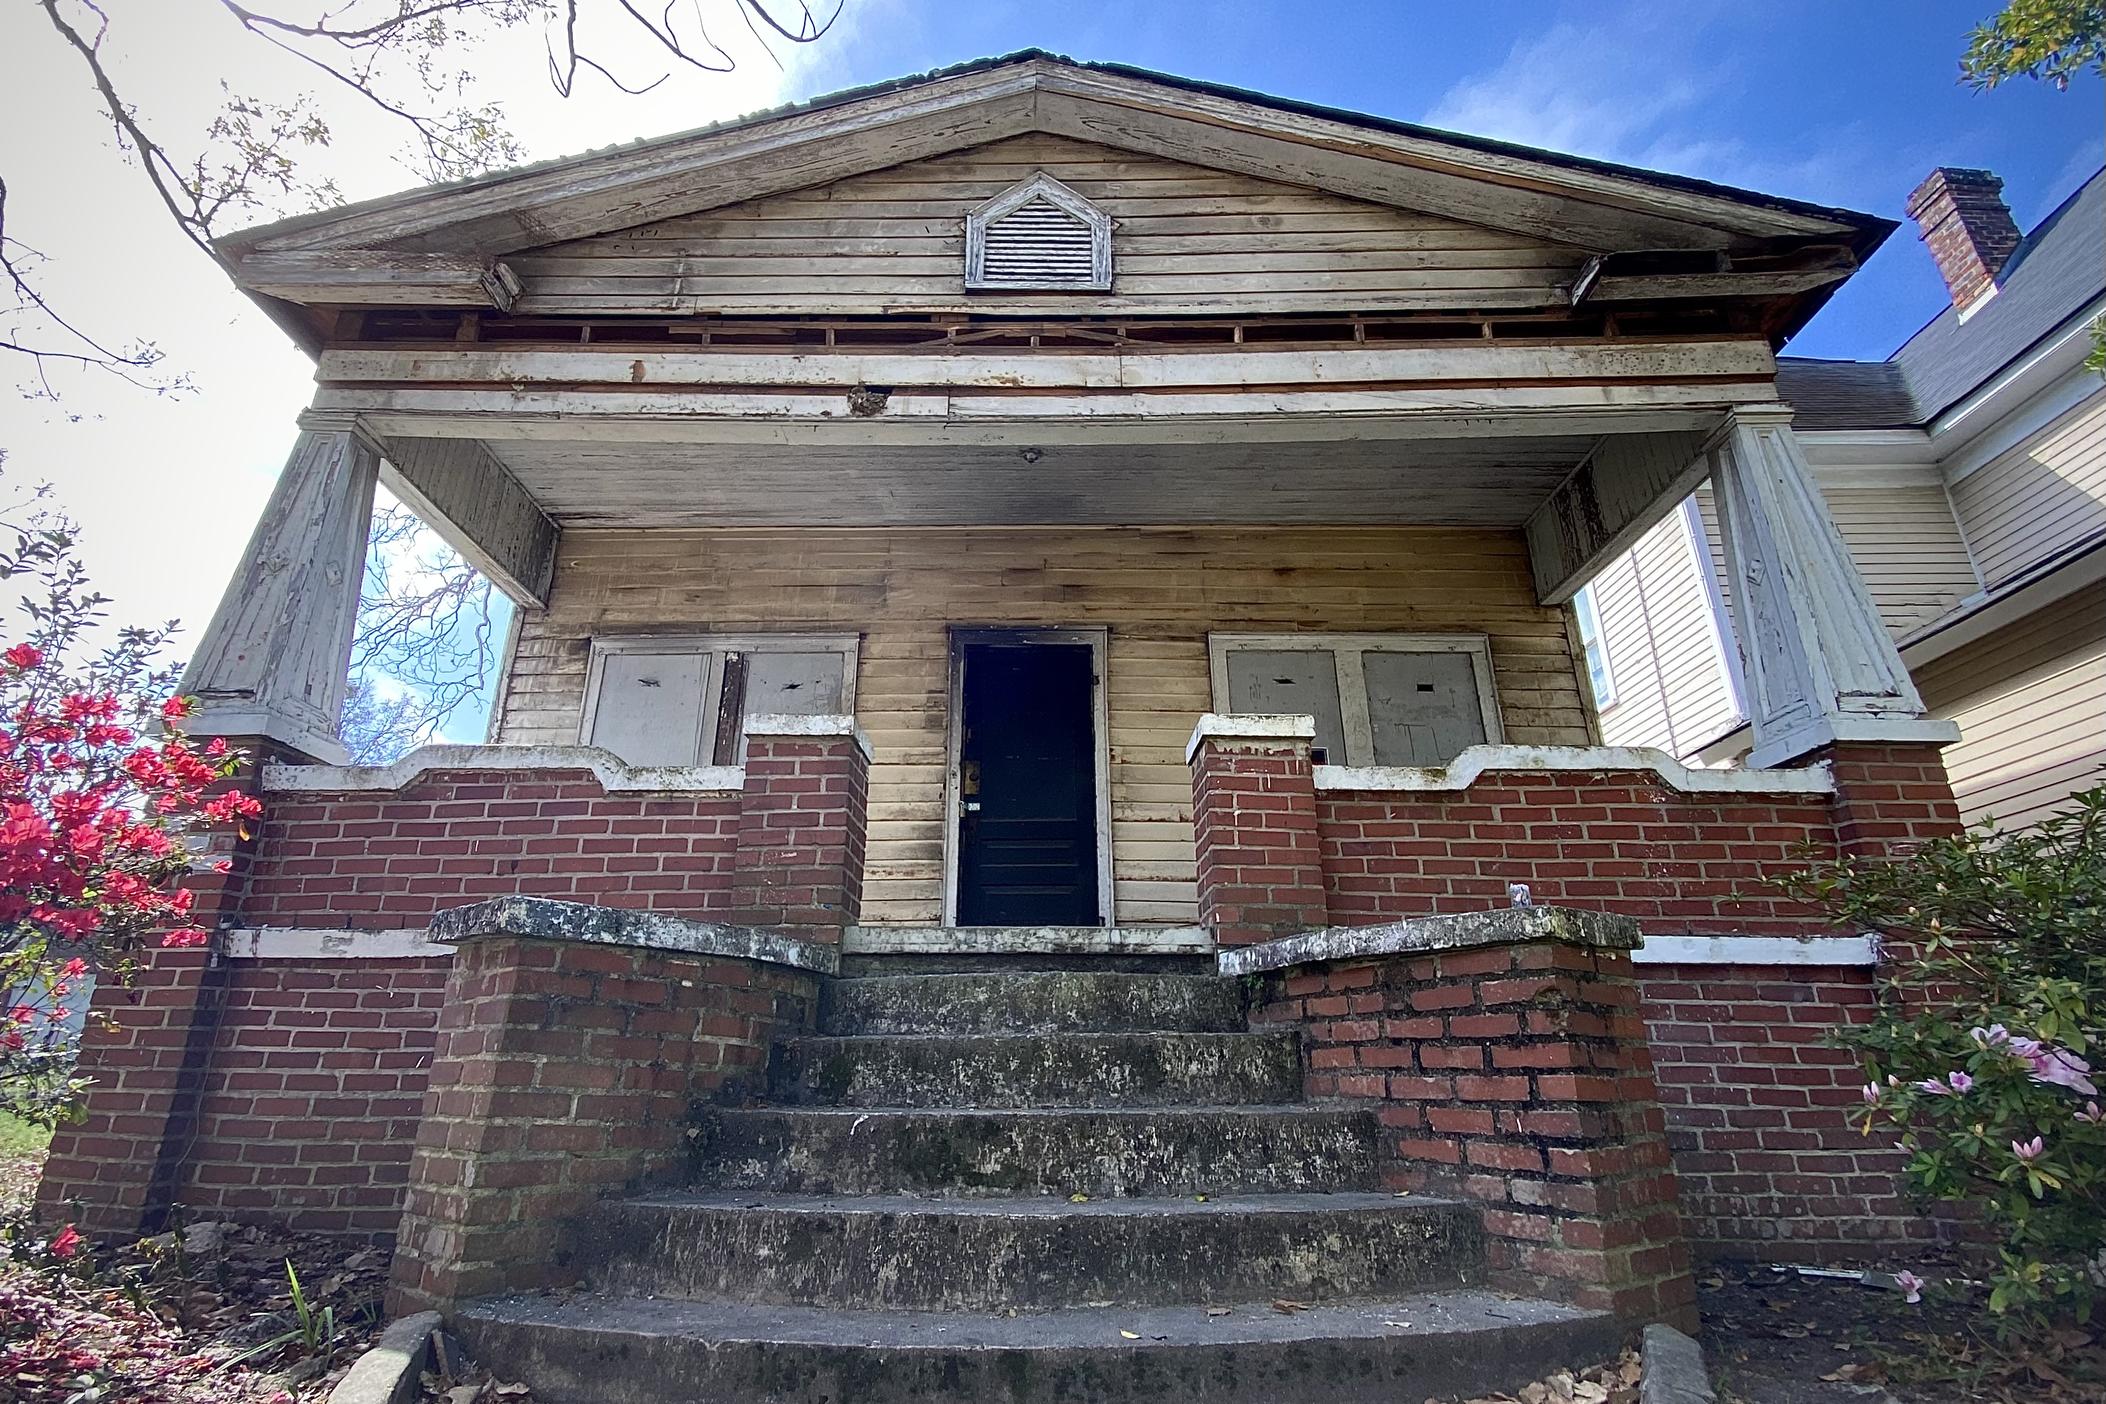 This house in the Cuyler-Brownville neighborhood of Savannah is undergoing extensive renovation, as part of a new effort to combat rising home prices through the use of historic preservation.